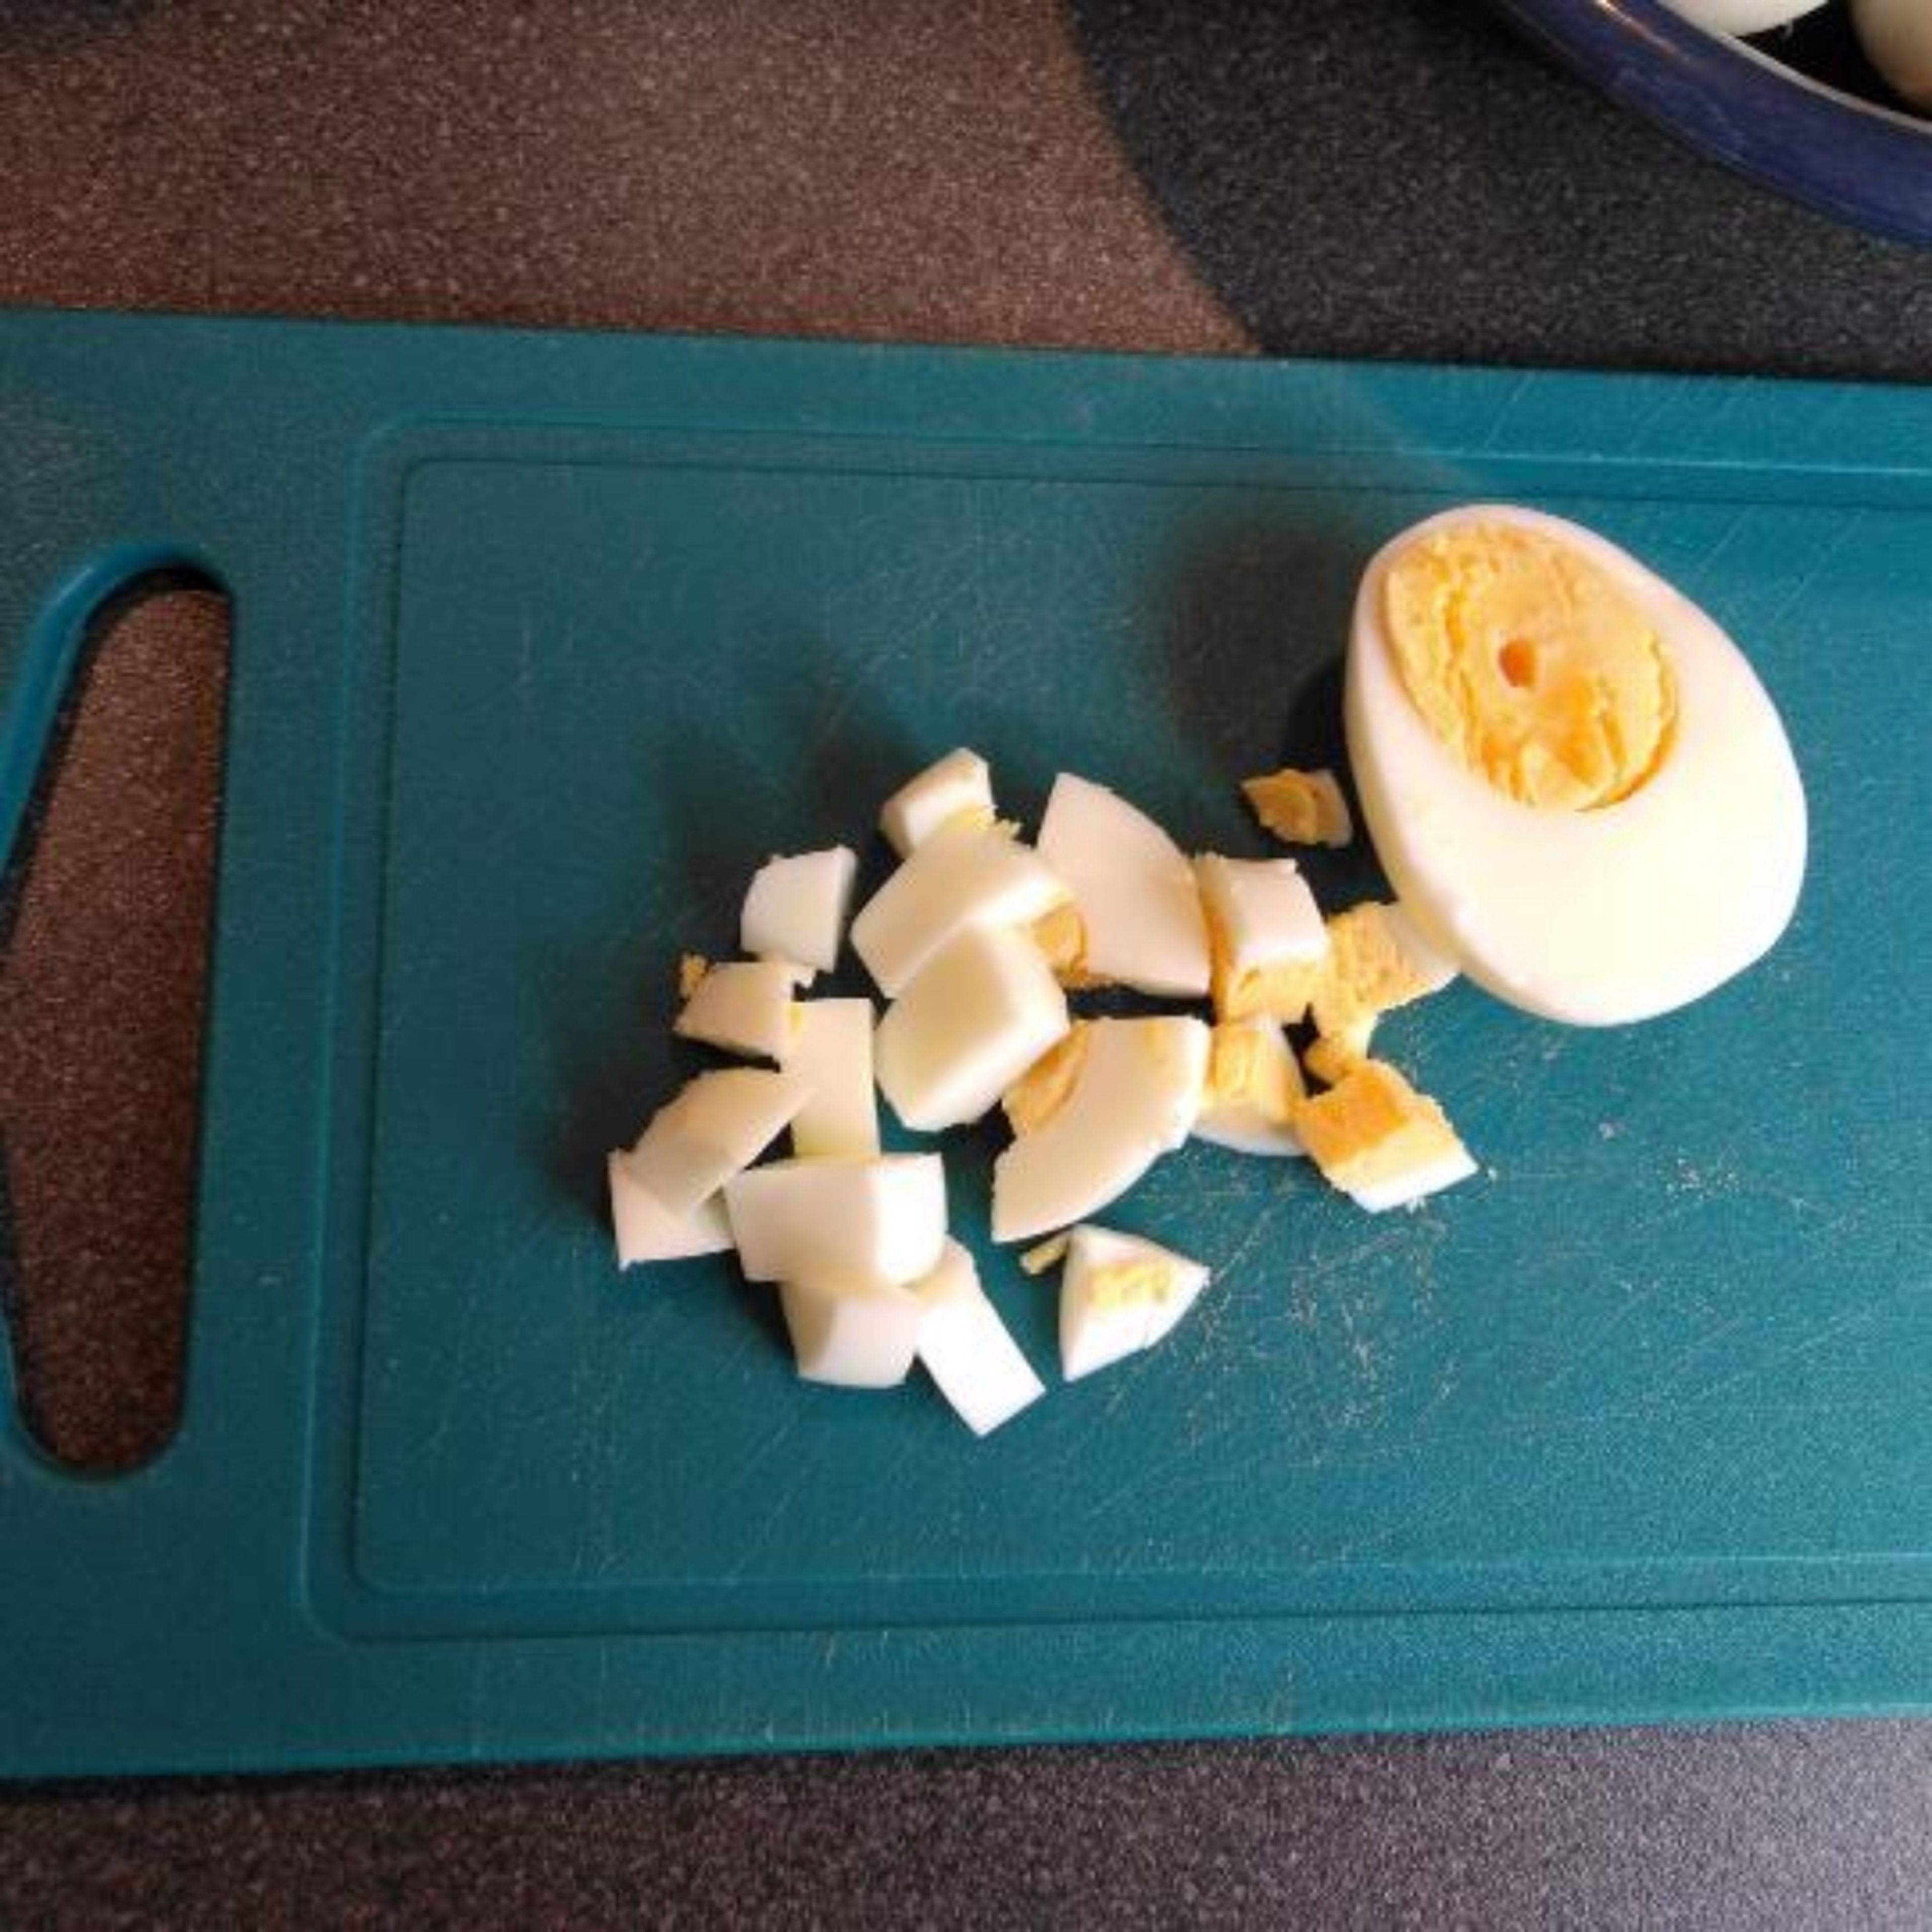 Boil eggs until cooked through, let cool, and dice into cubes.